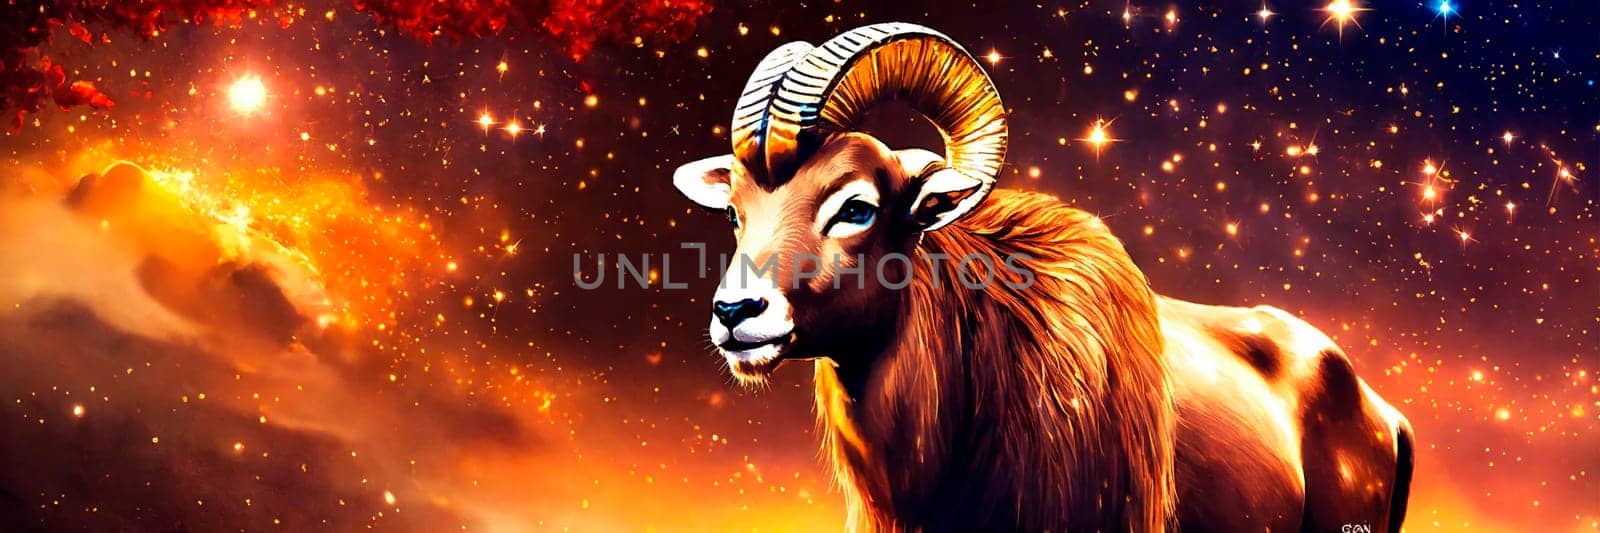 zodiac sign Aries on a background of stars. Selective focus. by yanadjana